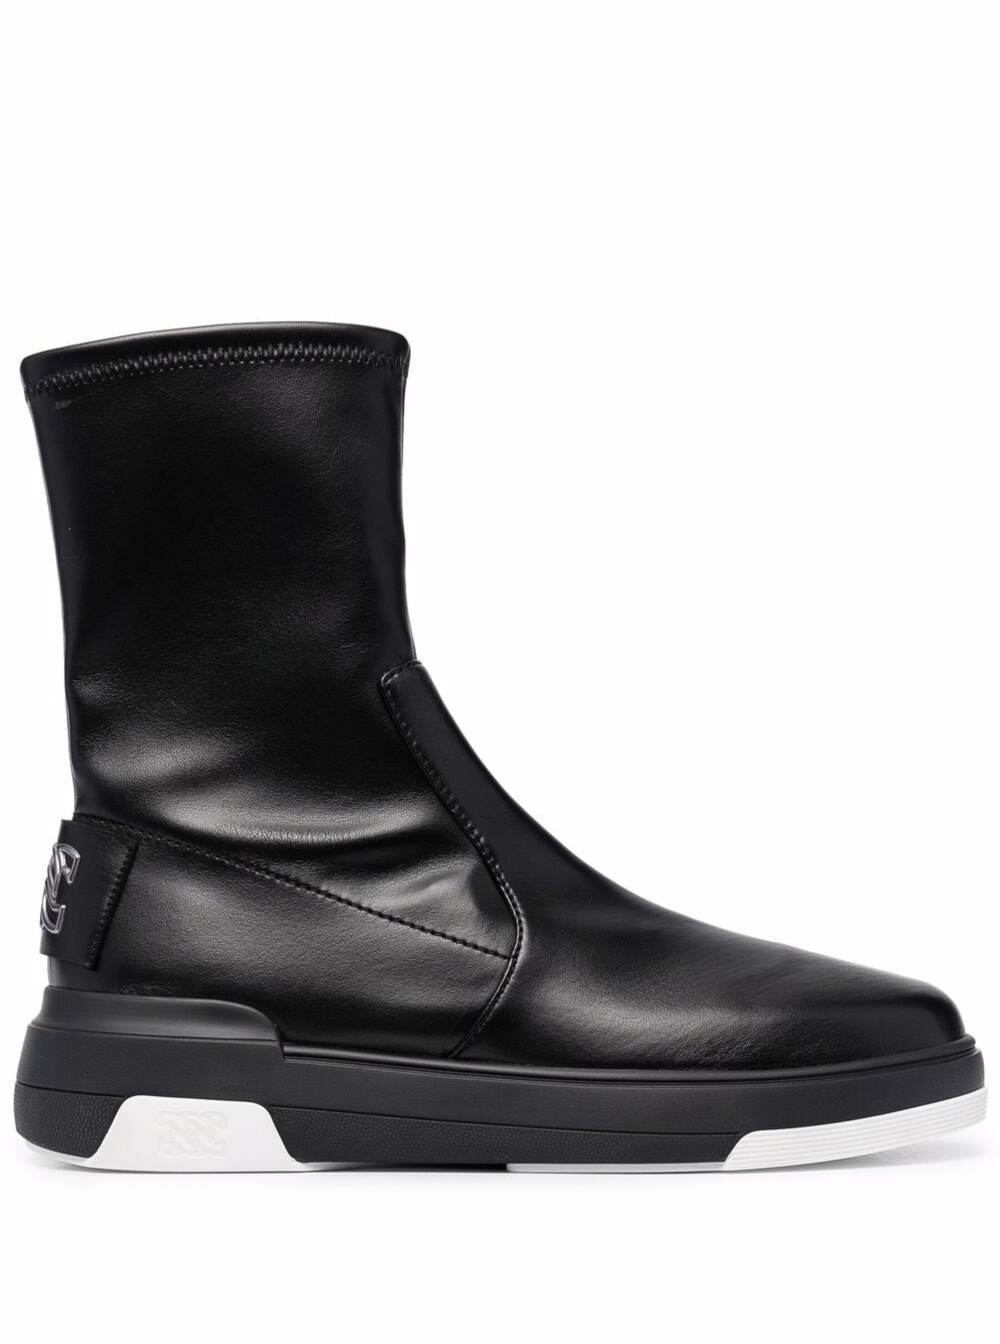 Casadei Black And White Vegan Leather Boots